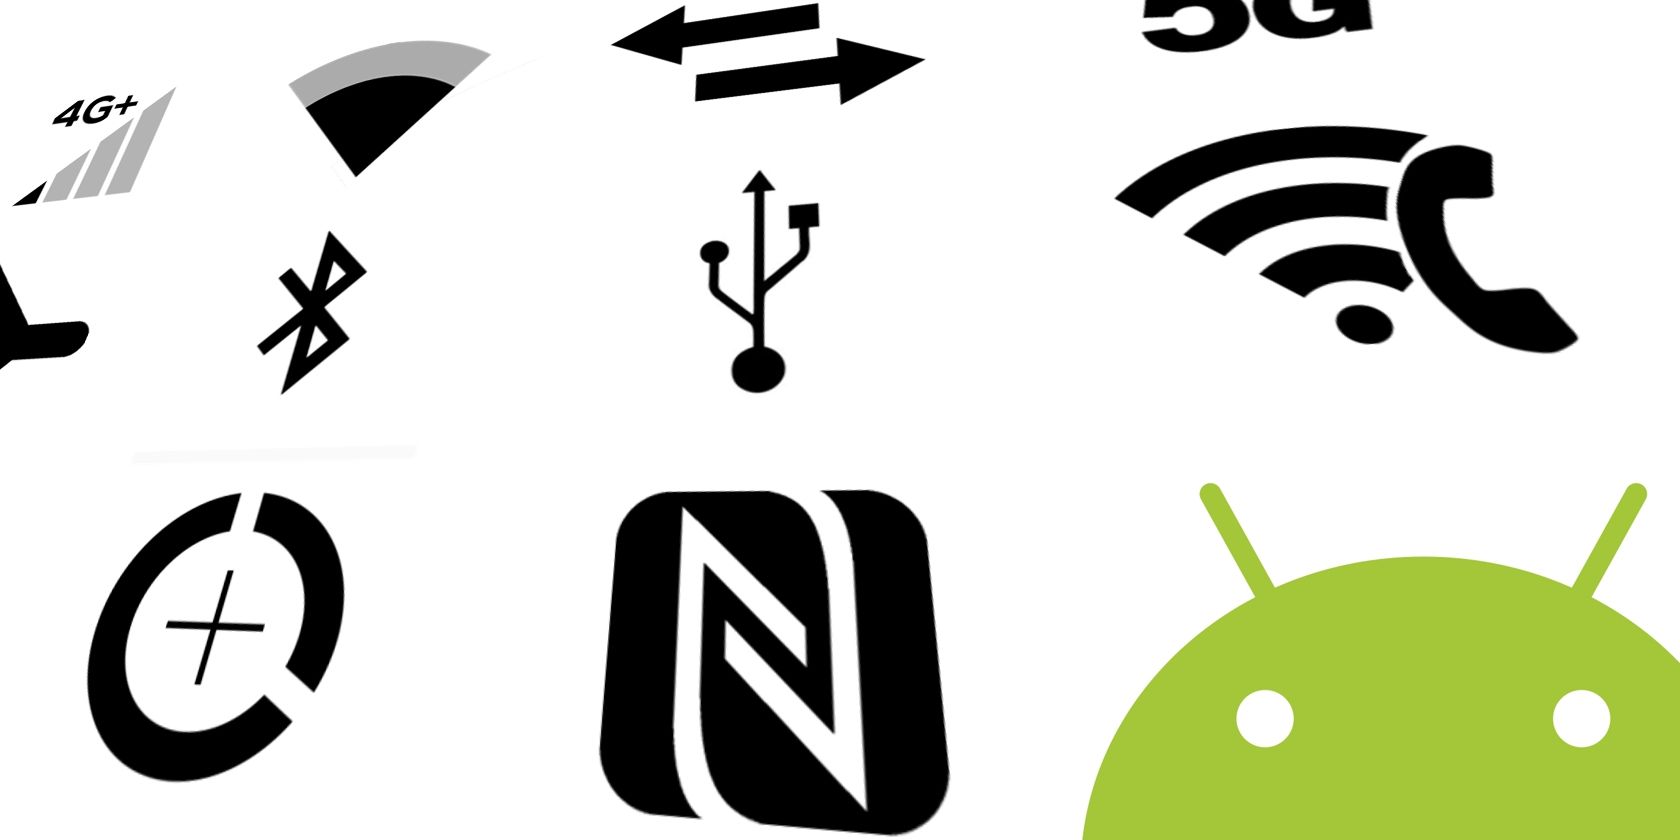 An assortment of common Android status bar symbols, alongside the Android logo.